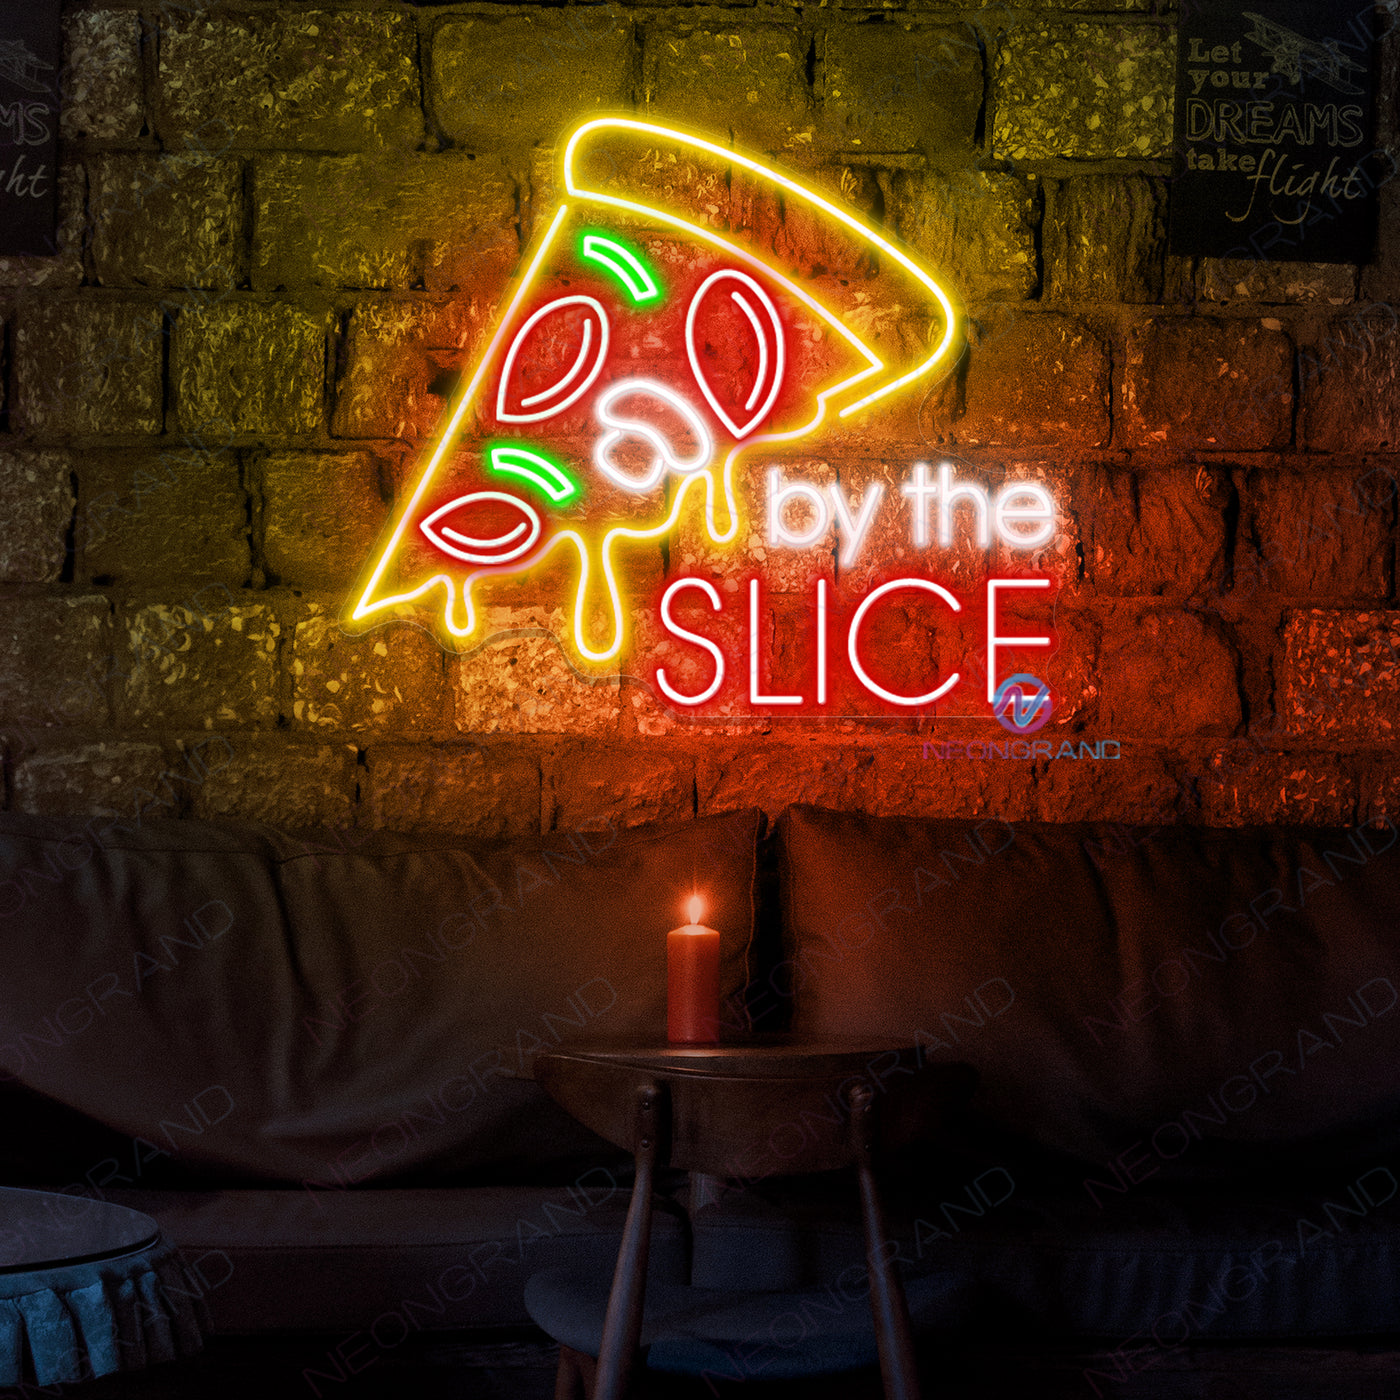 Pizza By The Slice Neon Sign Kitchen Led Light